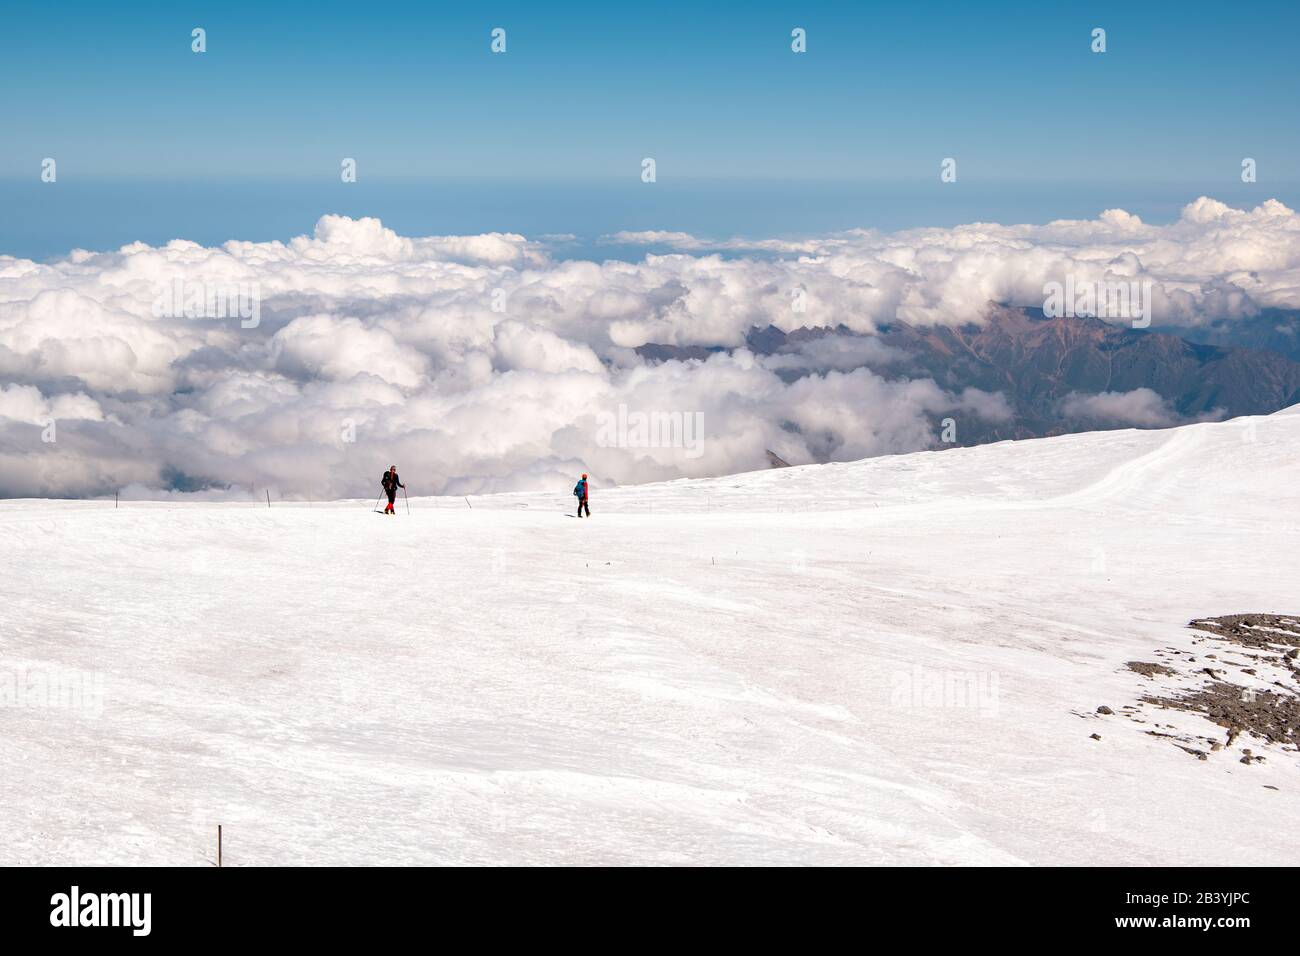 Landscape view of snow-capped hillside Mount Elbrus, Caucasus, Russia. A path leading down from the top. Two alpinists descending from the top. Clouds Stock Photo